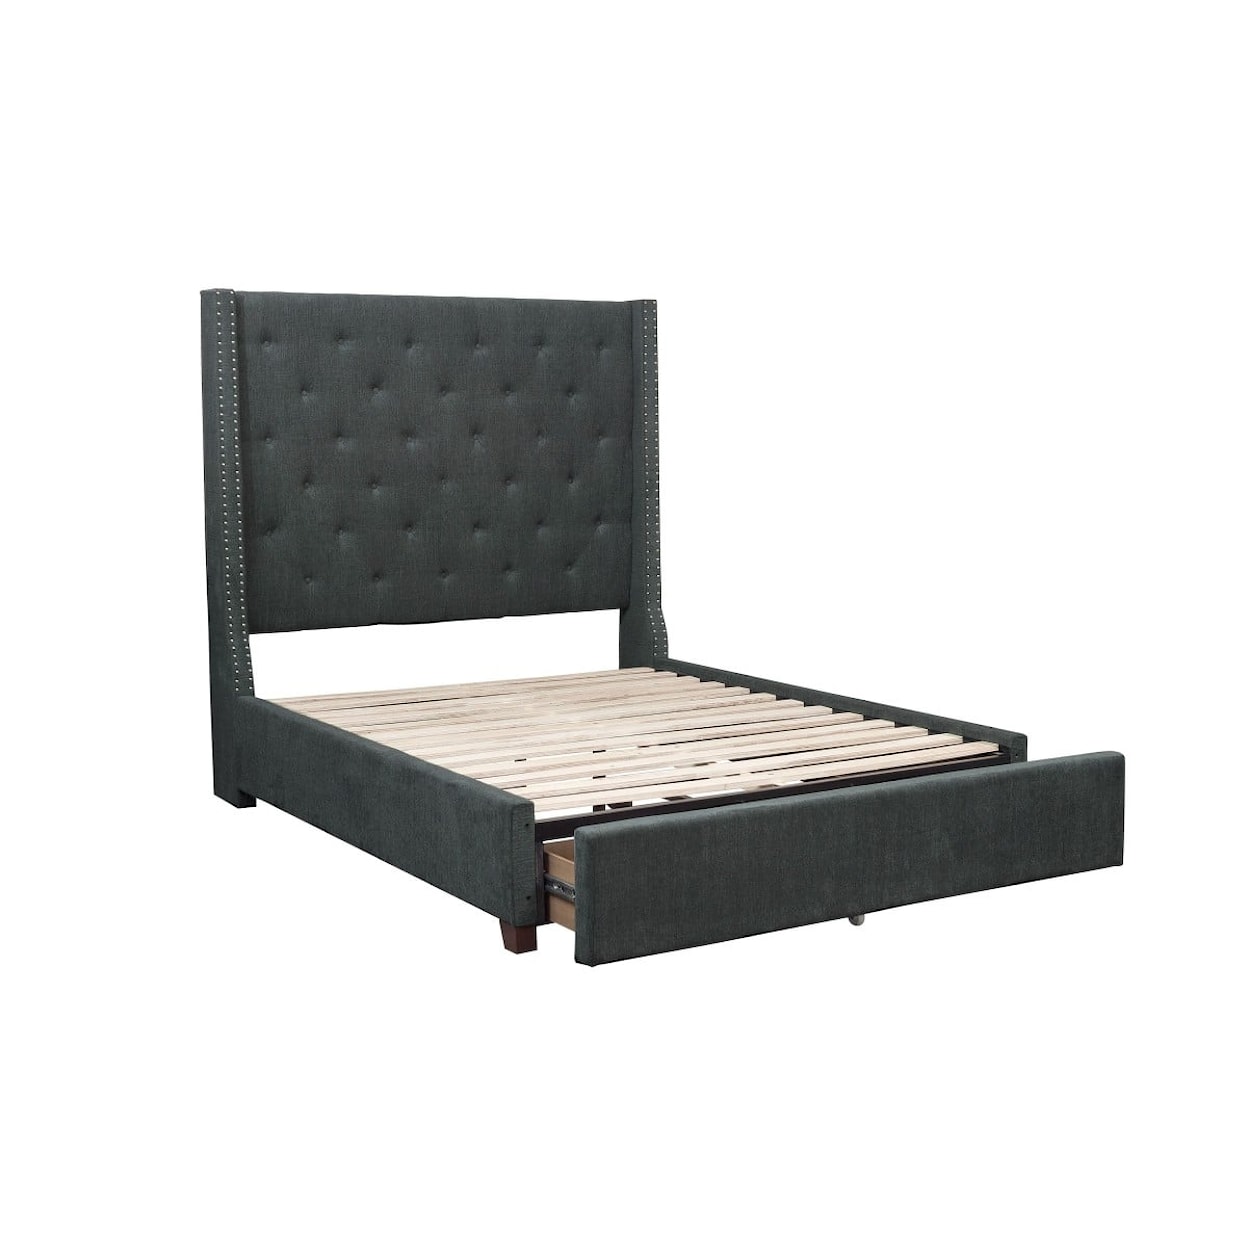 Homelegance Furniture Fairborn Full Bed  Bed with Storage FB